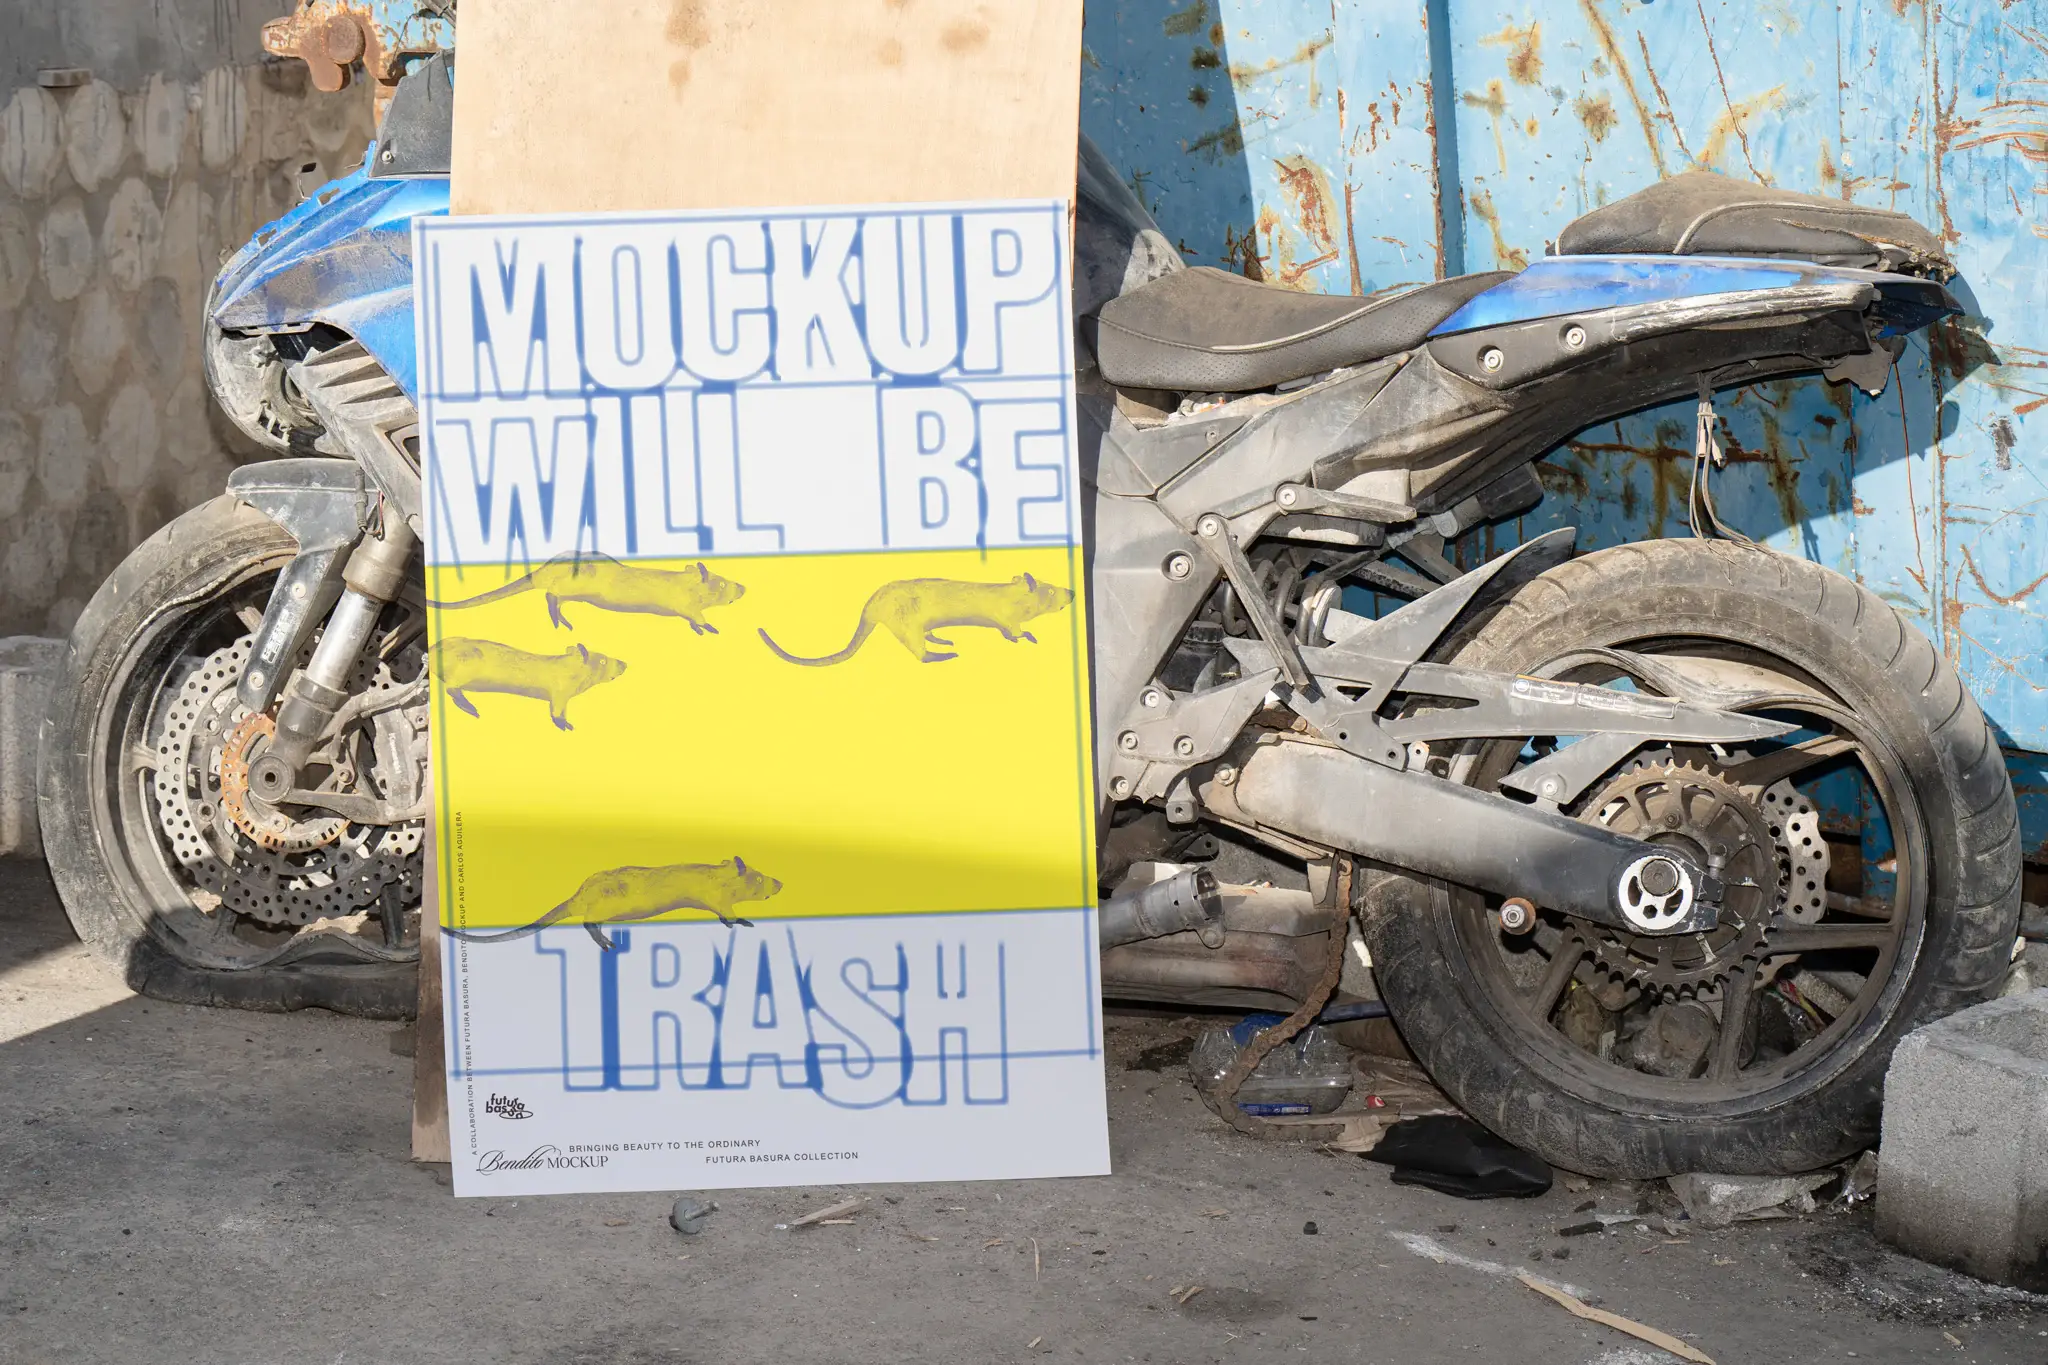 Poster mockup in front of a junk motorbike